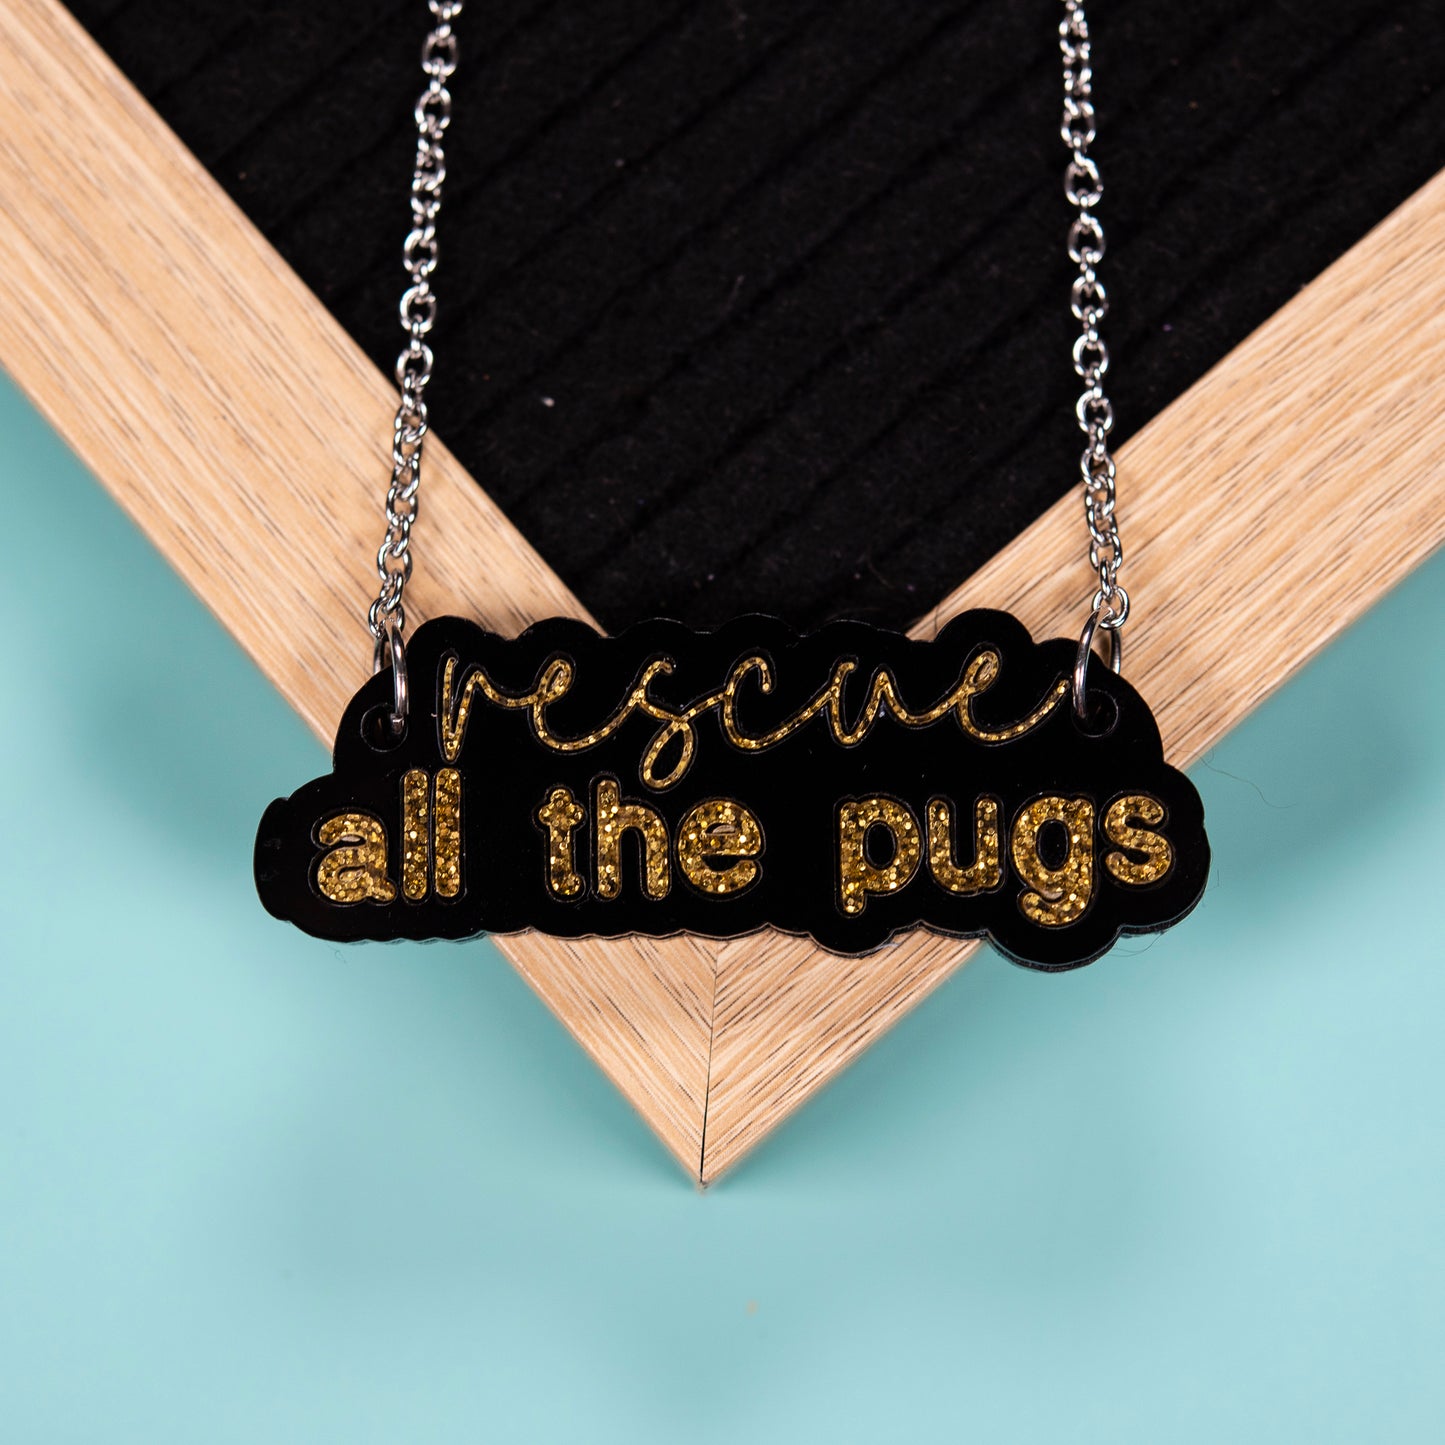 Rescue All The Pugs Necklace